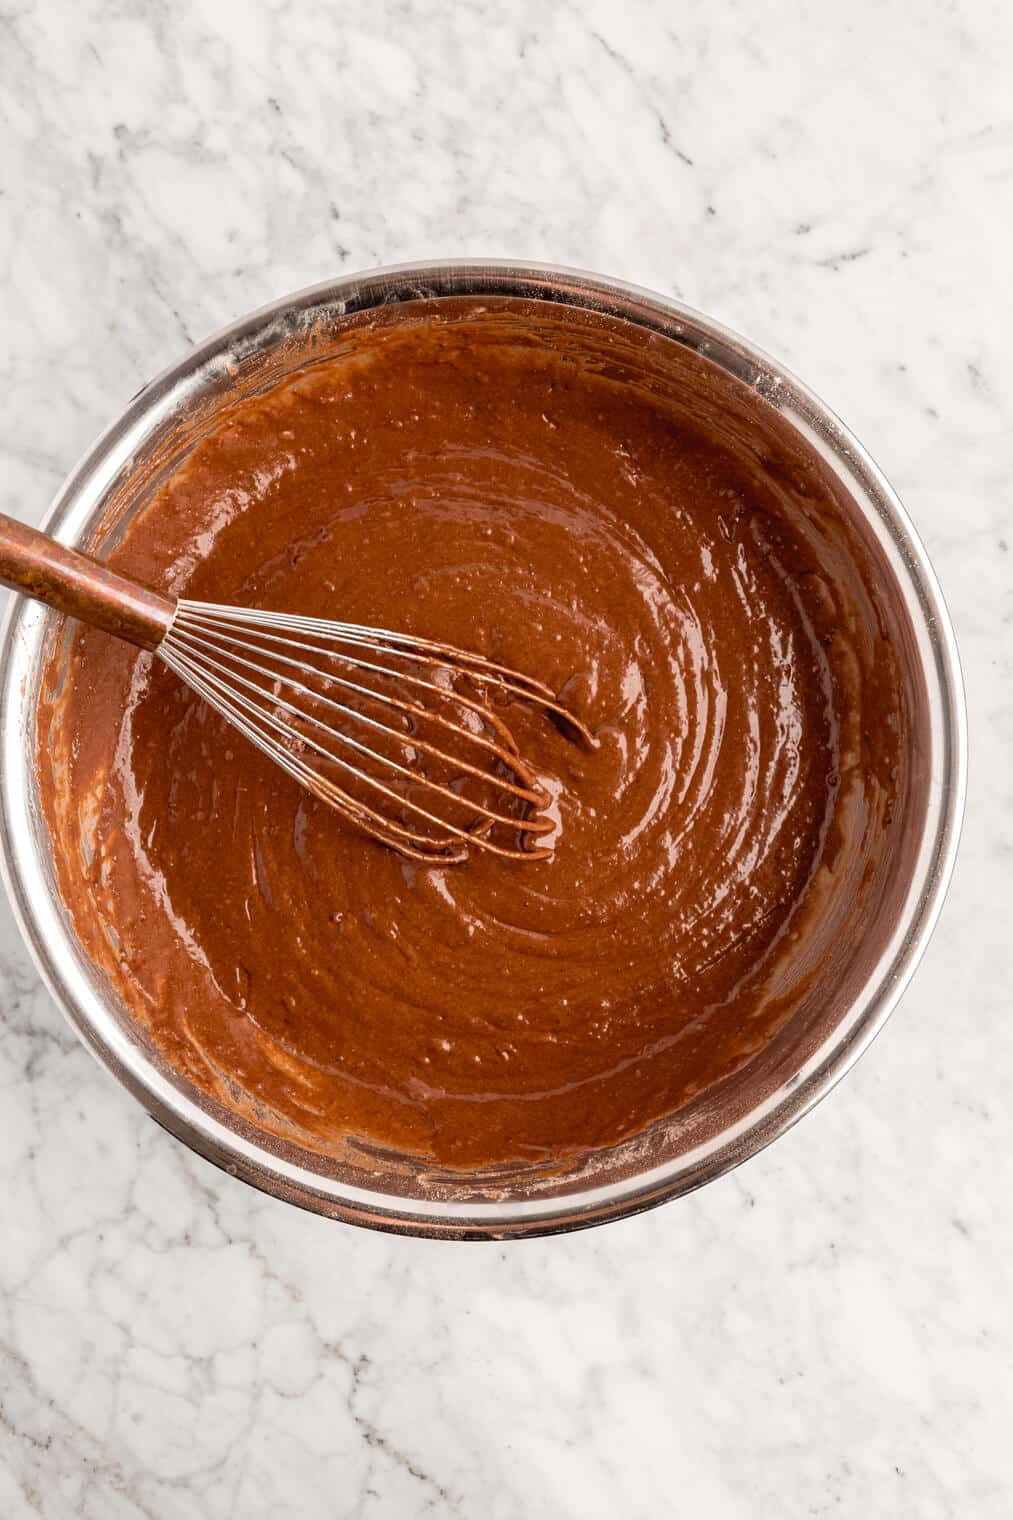 Chocolate cake batter whisked until smooth in a large metal bowl on a grey and white marble surface.